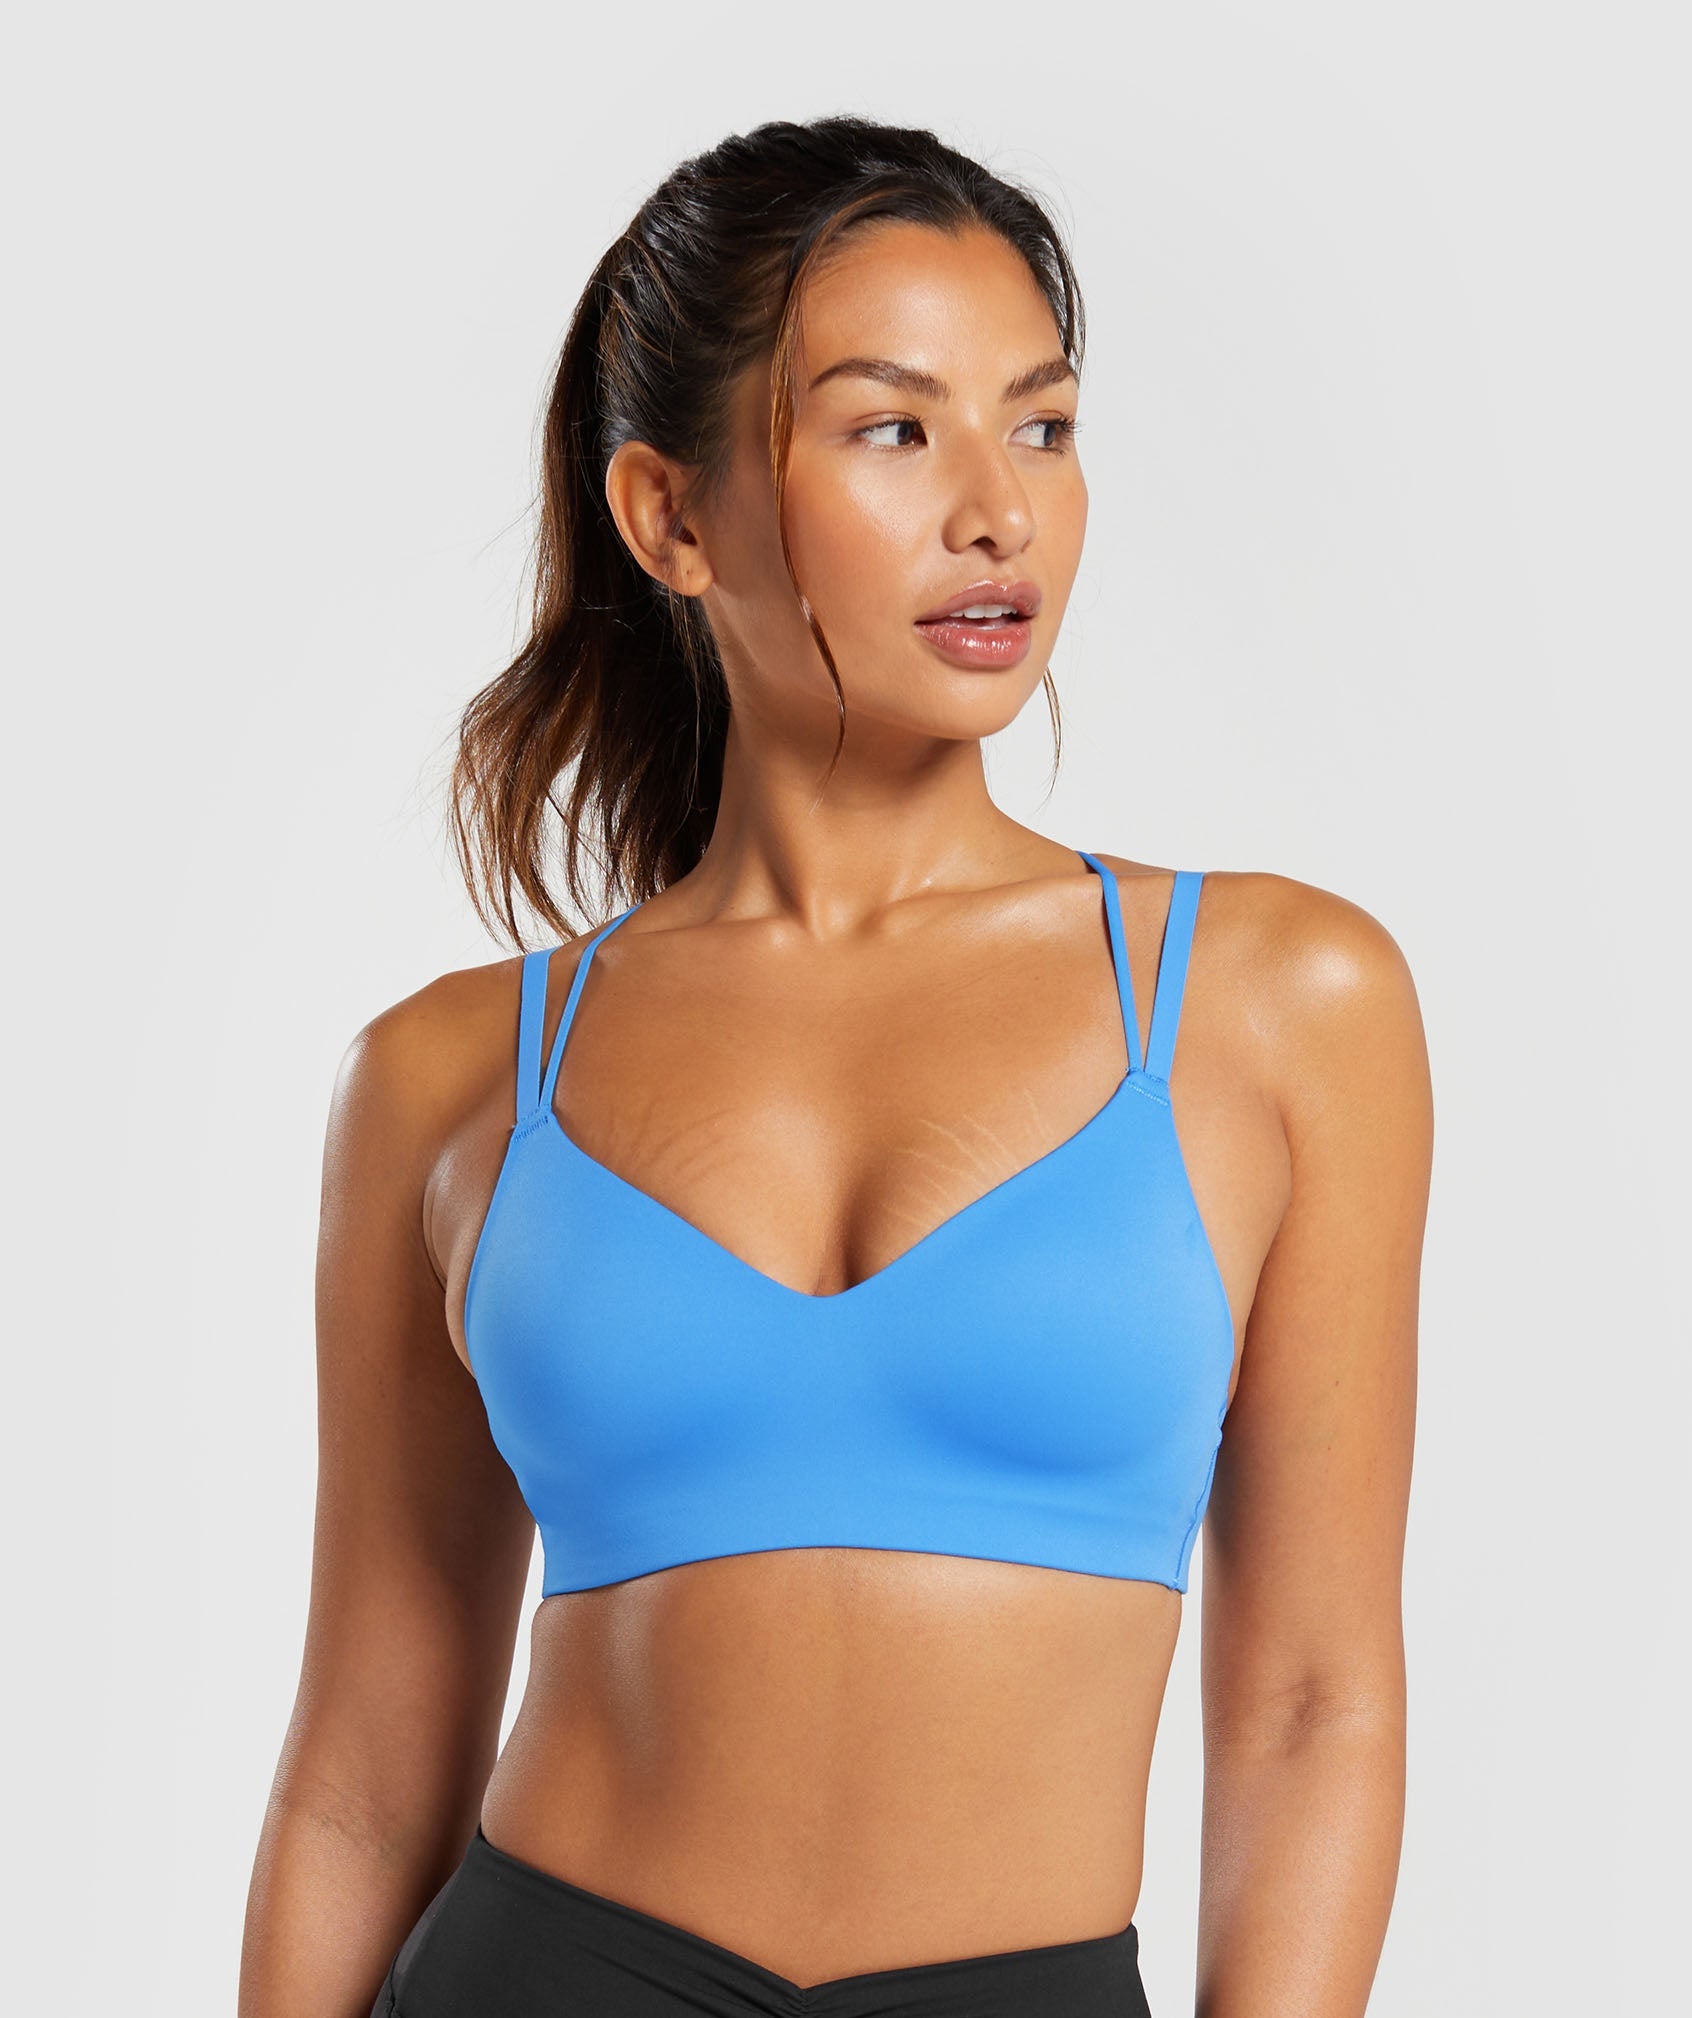 RUCHED STRAPPY SPORTS BRA Black Gymshark Womens Light Support Size